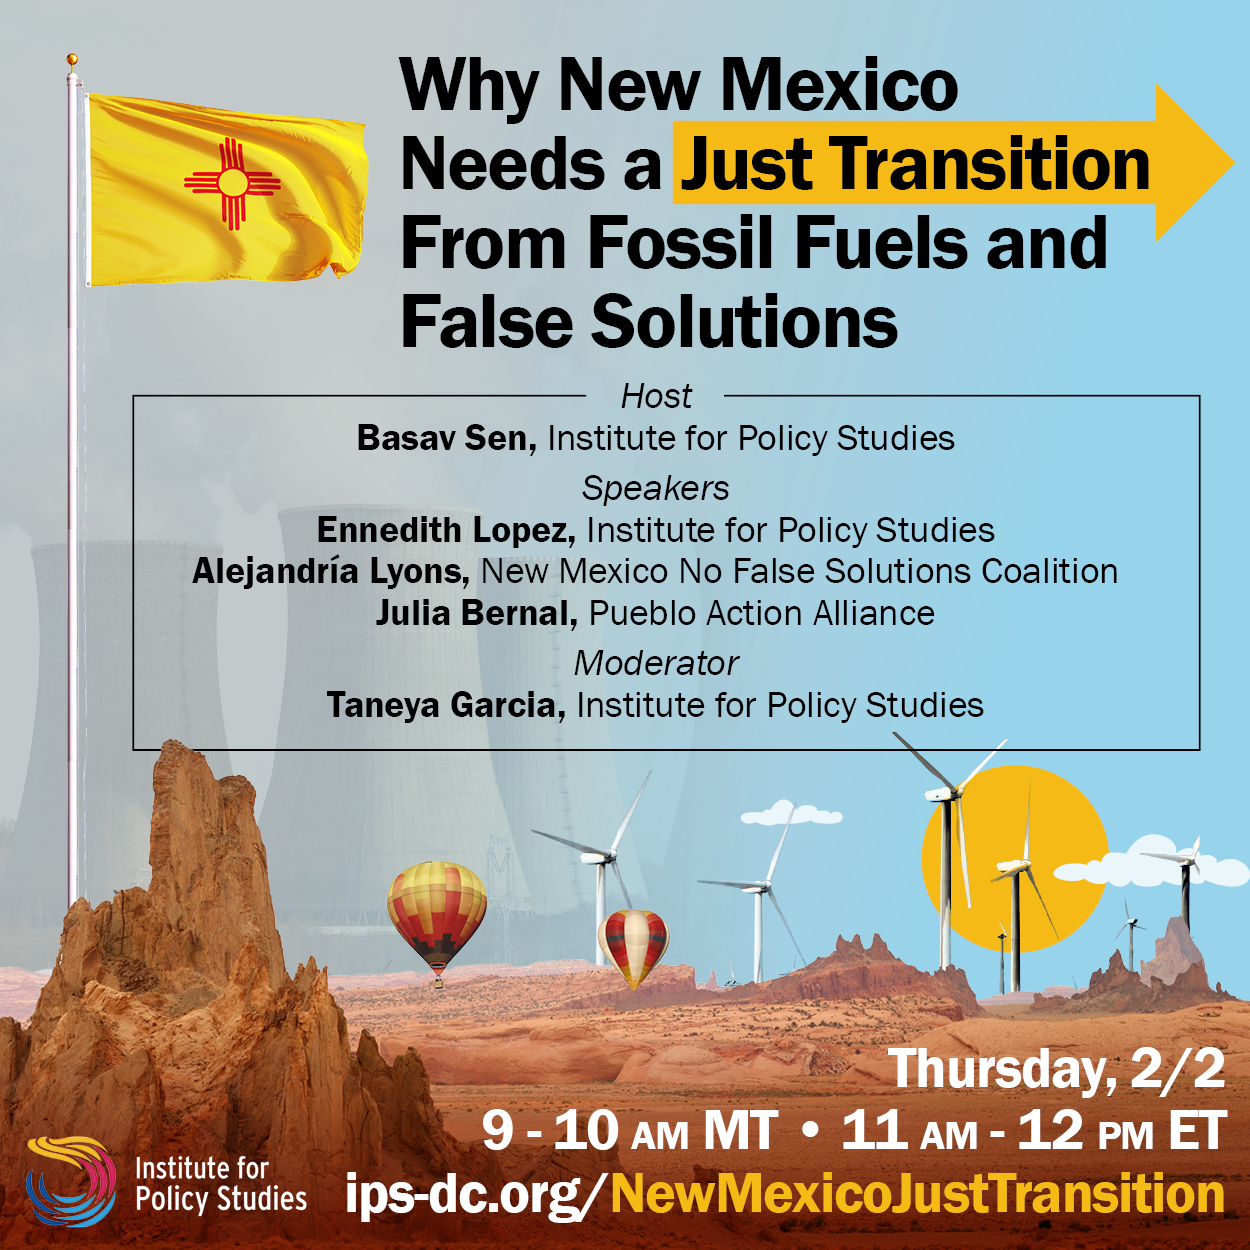 PRESS CONFERENCE: Join IPS and NM leaders 2/2 at 9 AM MT on “Why New Mexico Needs a Just Transition from Fossil Fuels and False Solutions”